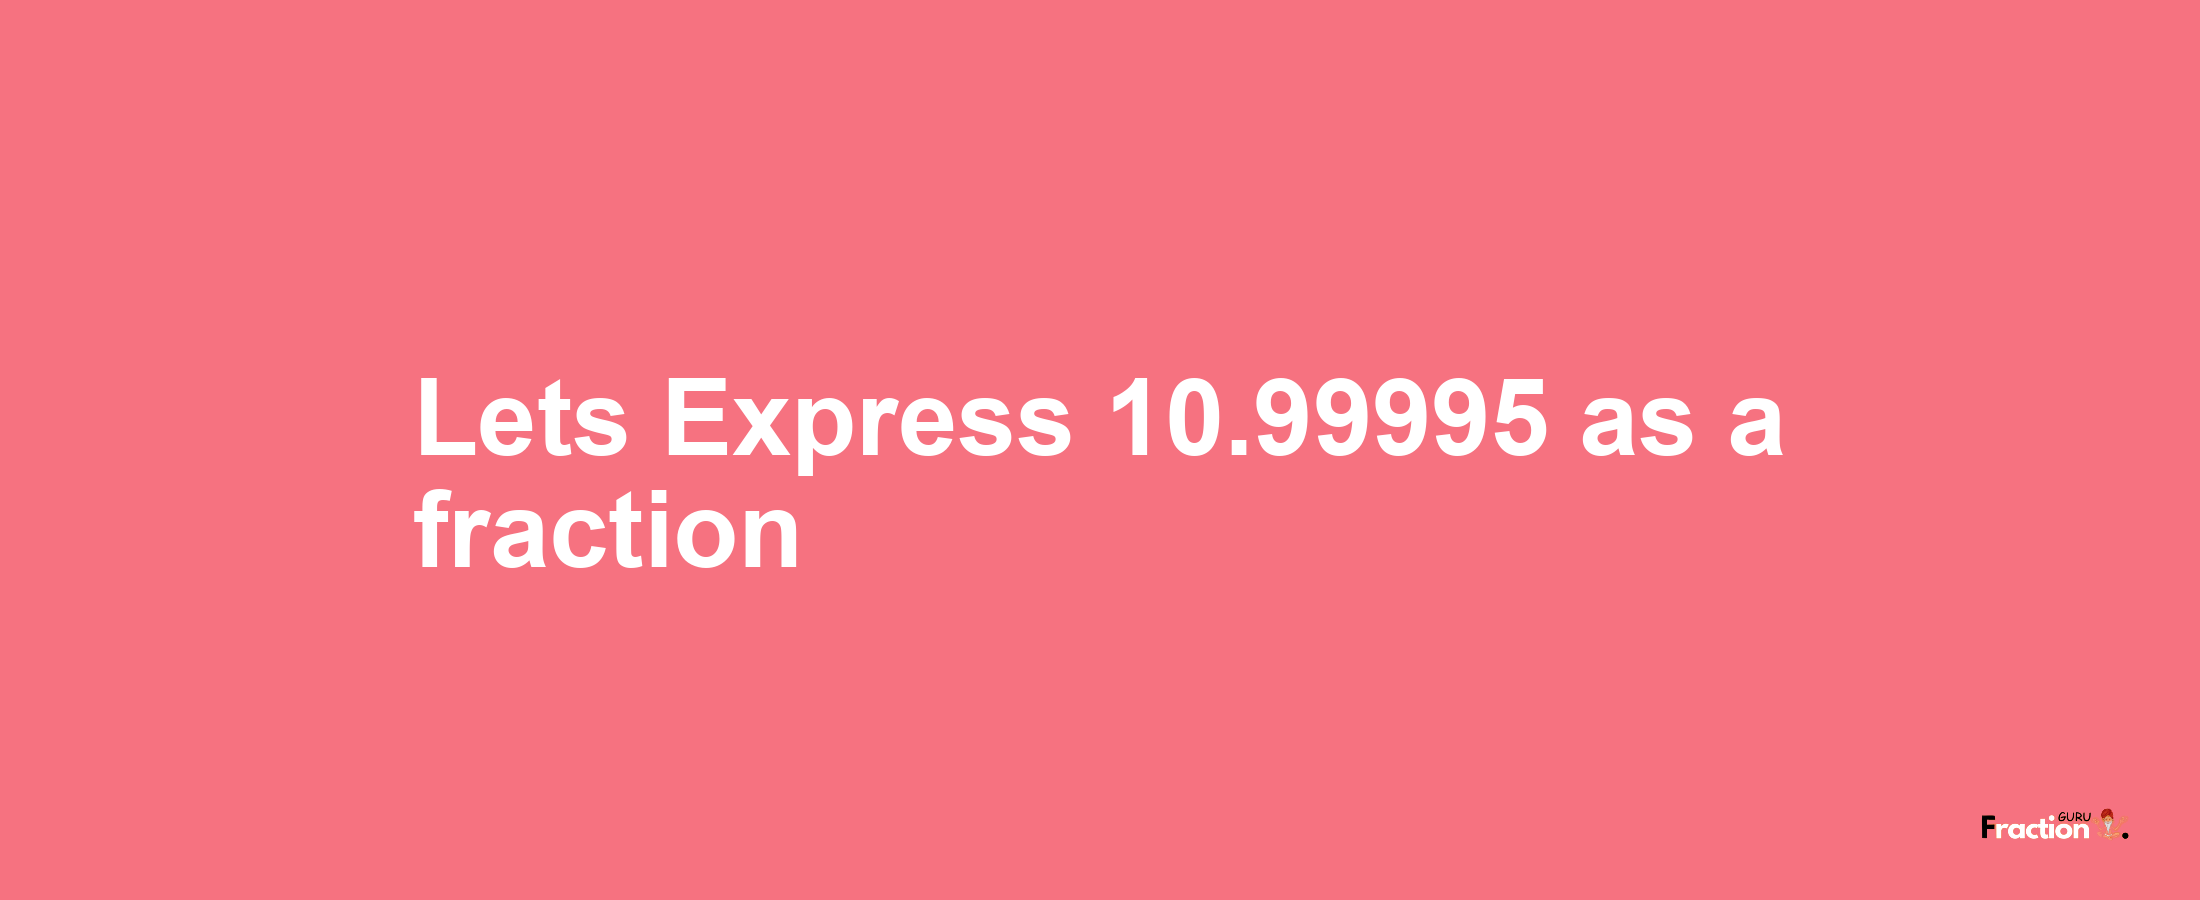 Lets Express 10.99995 as afraction